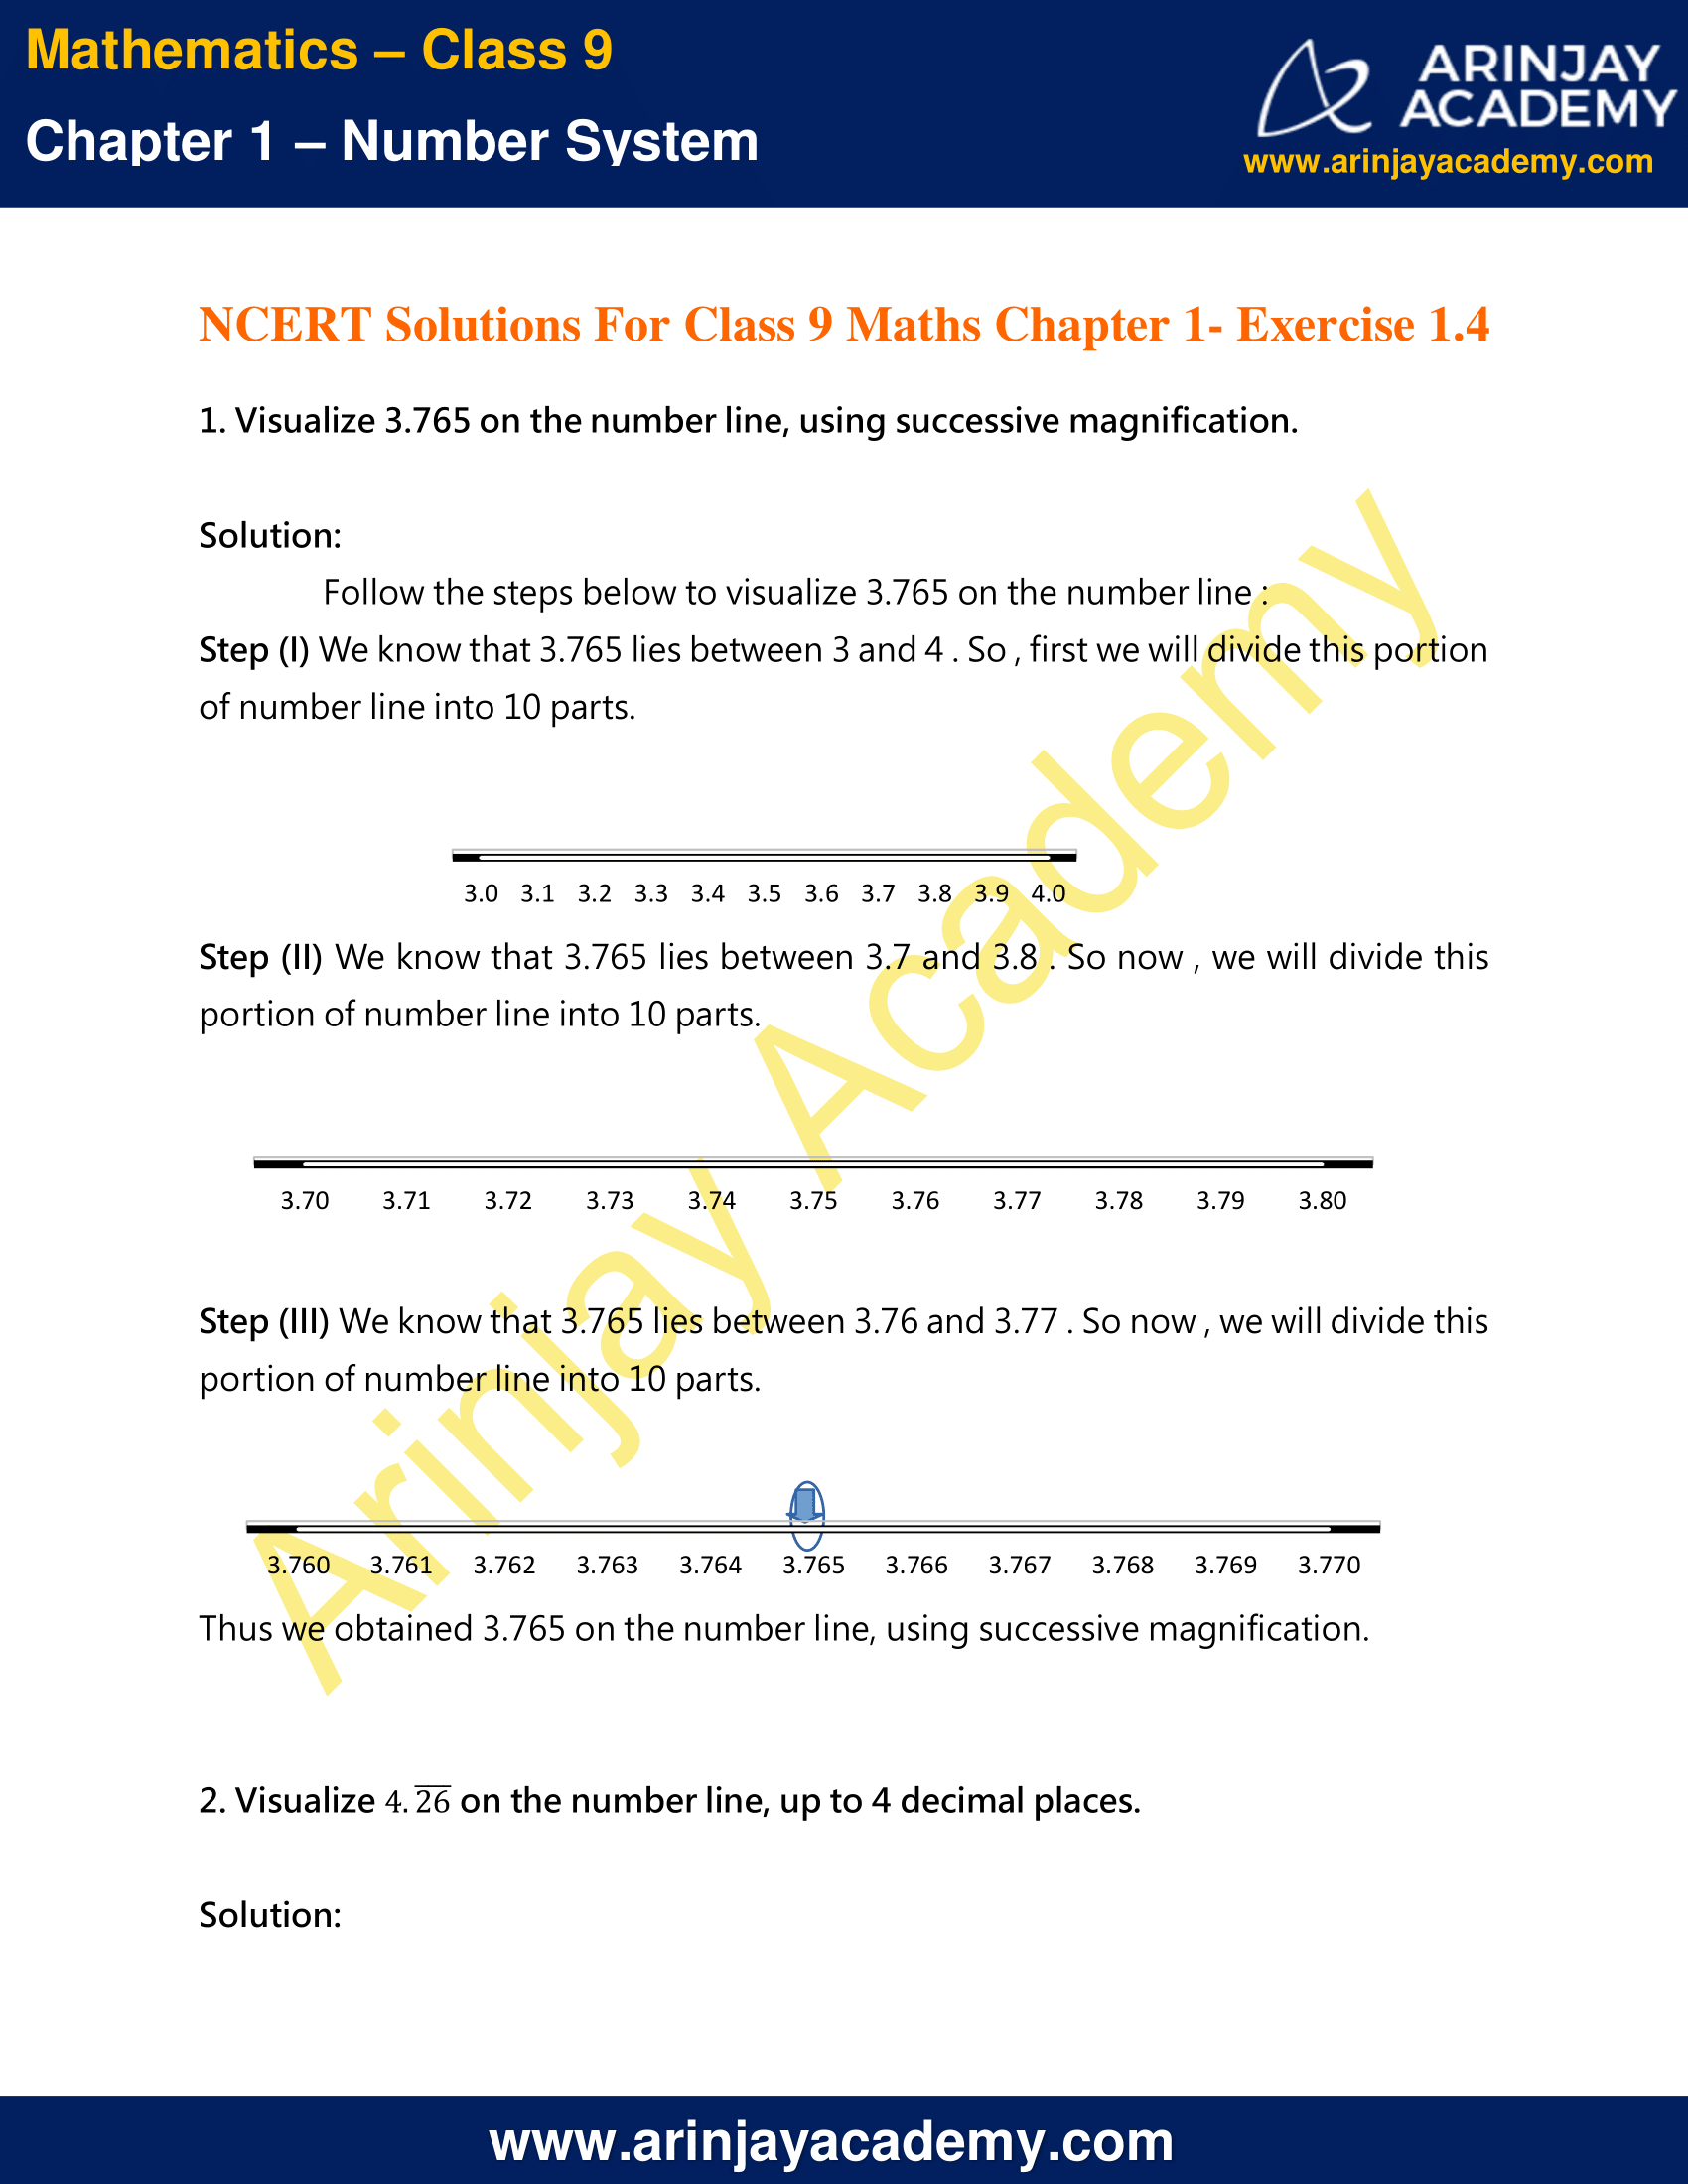 NCERT Solutions For Class 9 Maths Chapter 1 Exercise 1.4 image 1